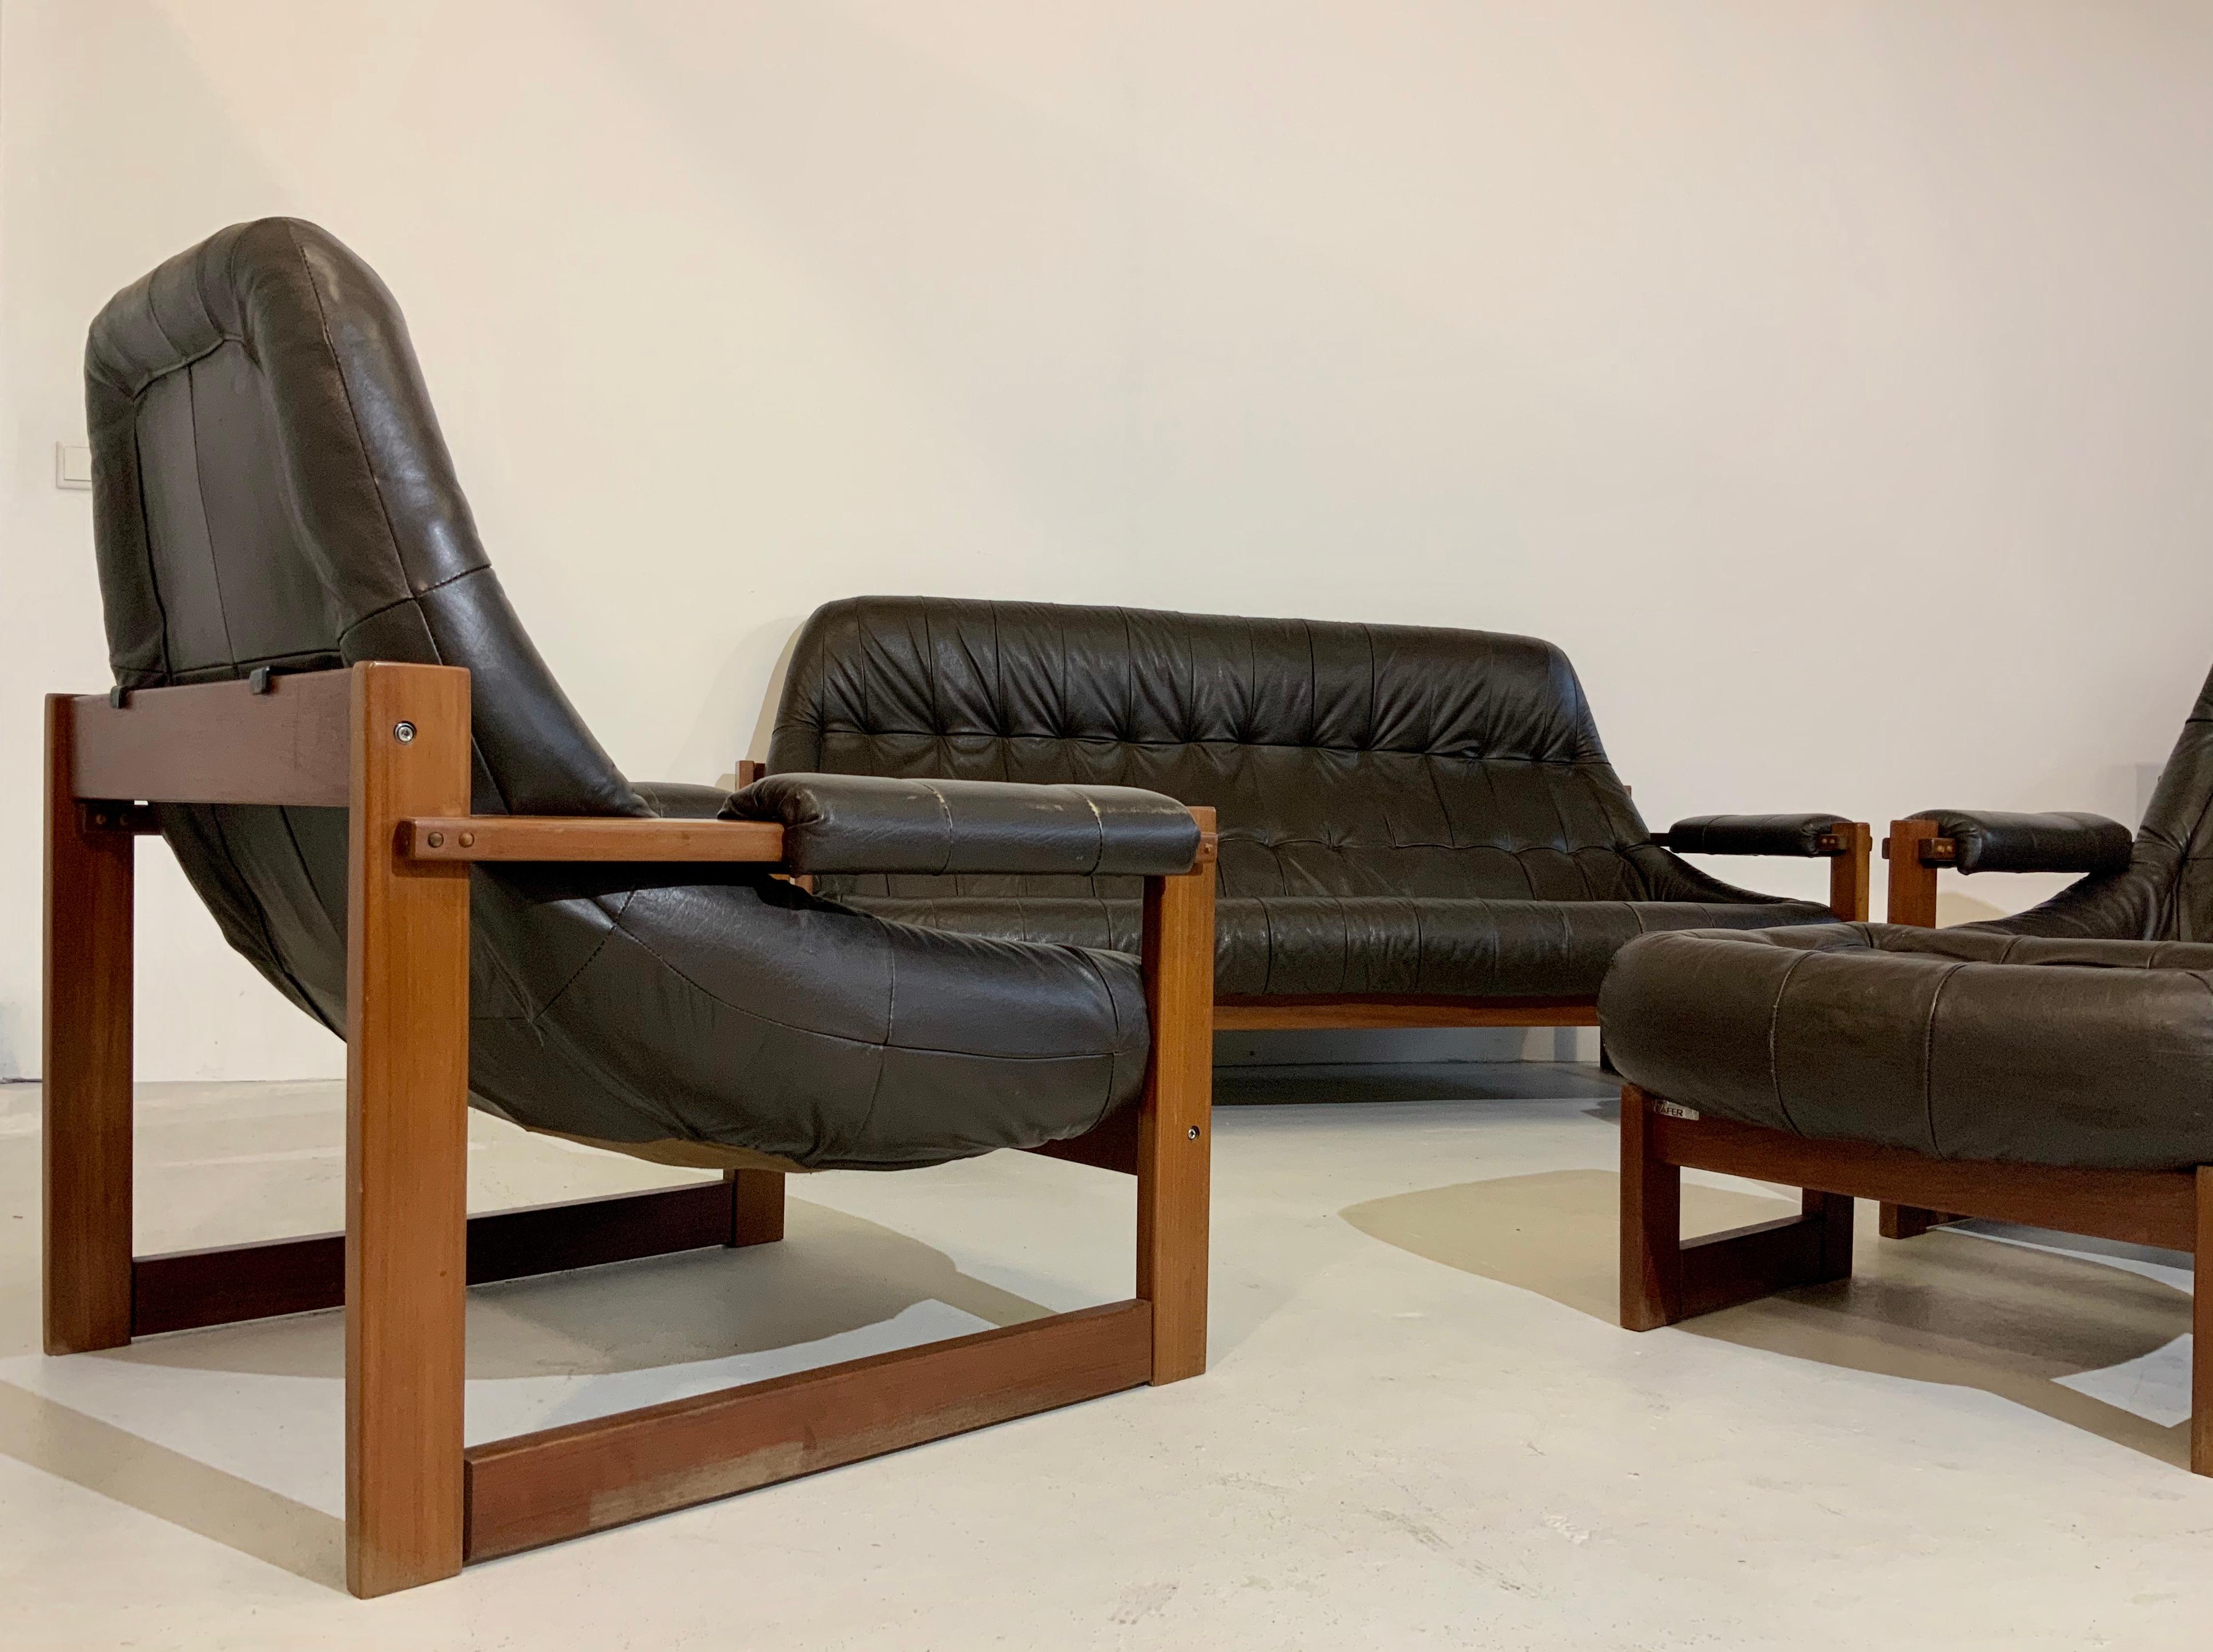 An extraordinary & very rare living room set designed in 1960s-1970s by the well renowned furniture maker Percival Lafer in Brazil is offered here.
Percival Lafer is a contemporary Brazilian furniture maker and pioneer of the Brazilian Modernist